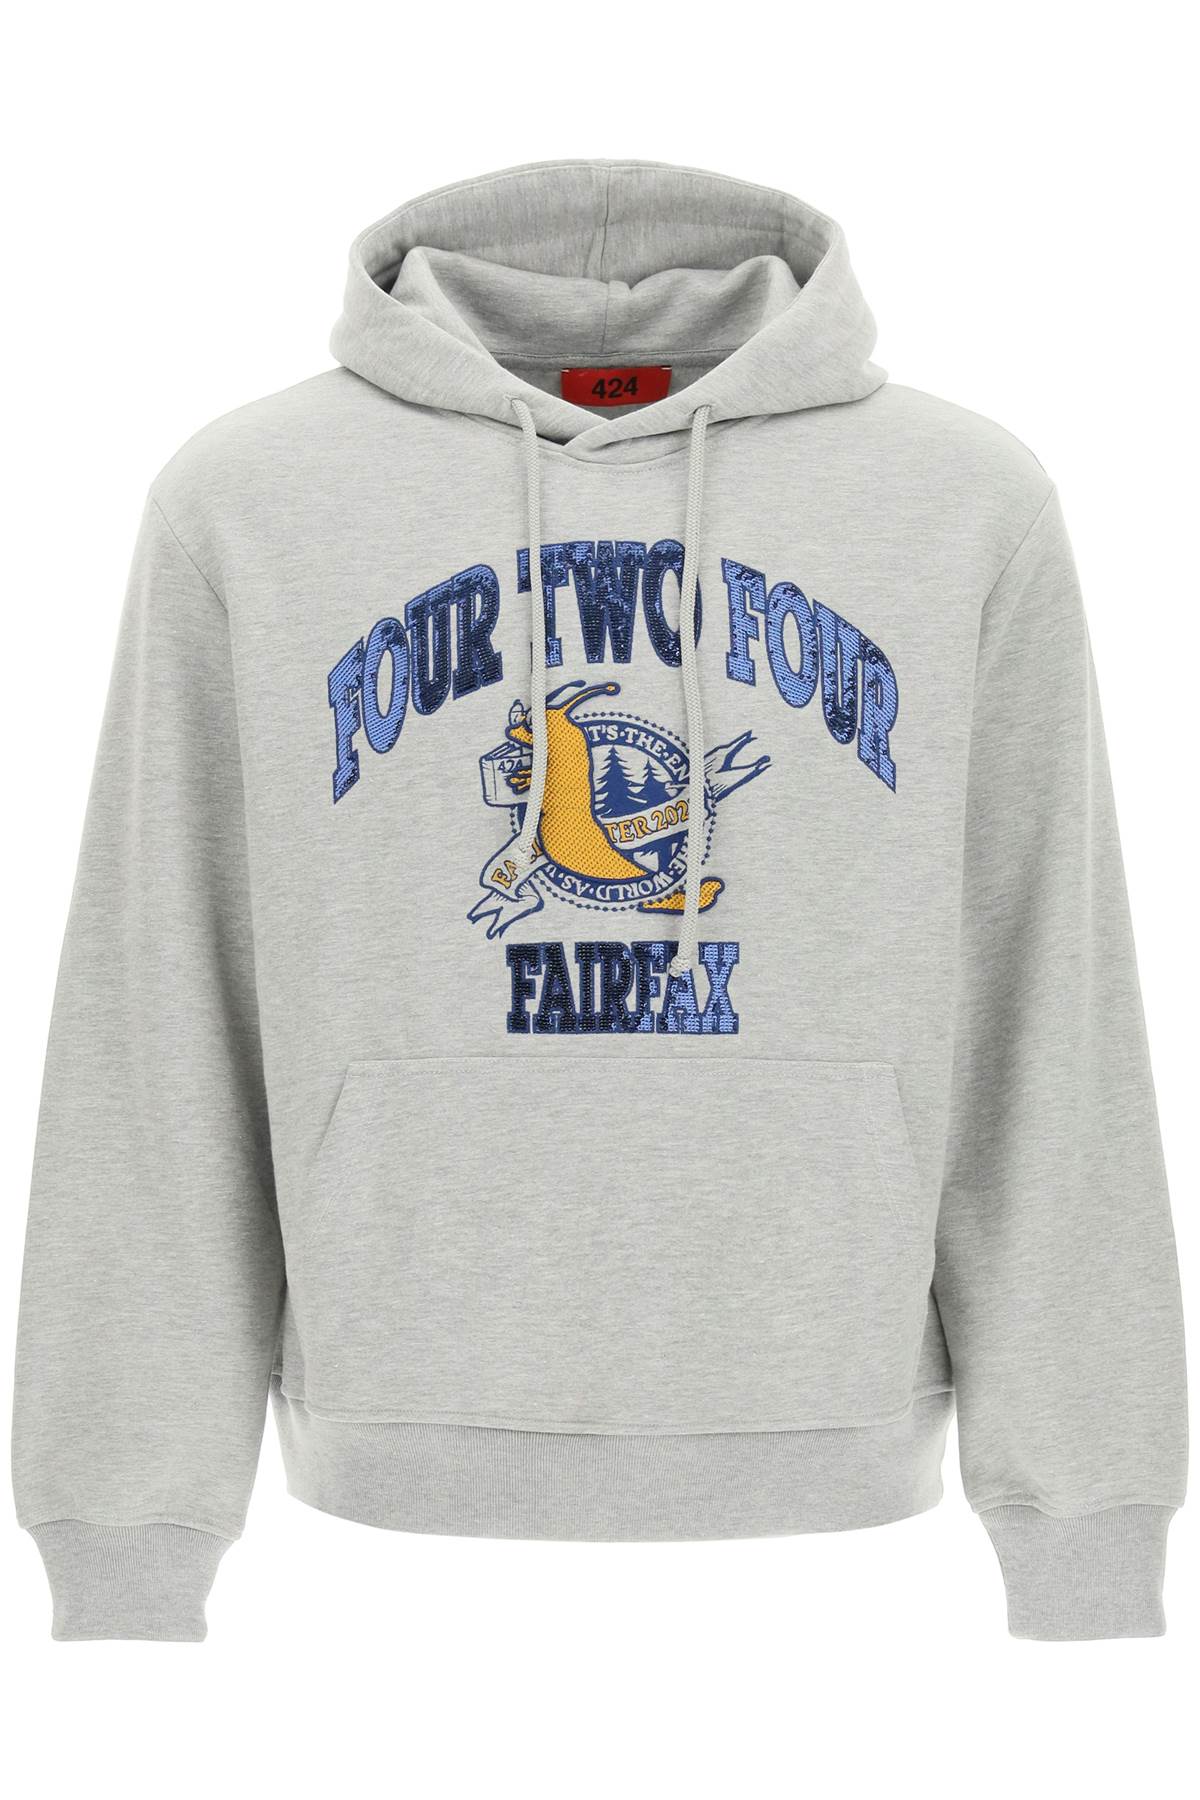 FourTwoFour on Fairfax College Embroidery Hoodie